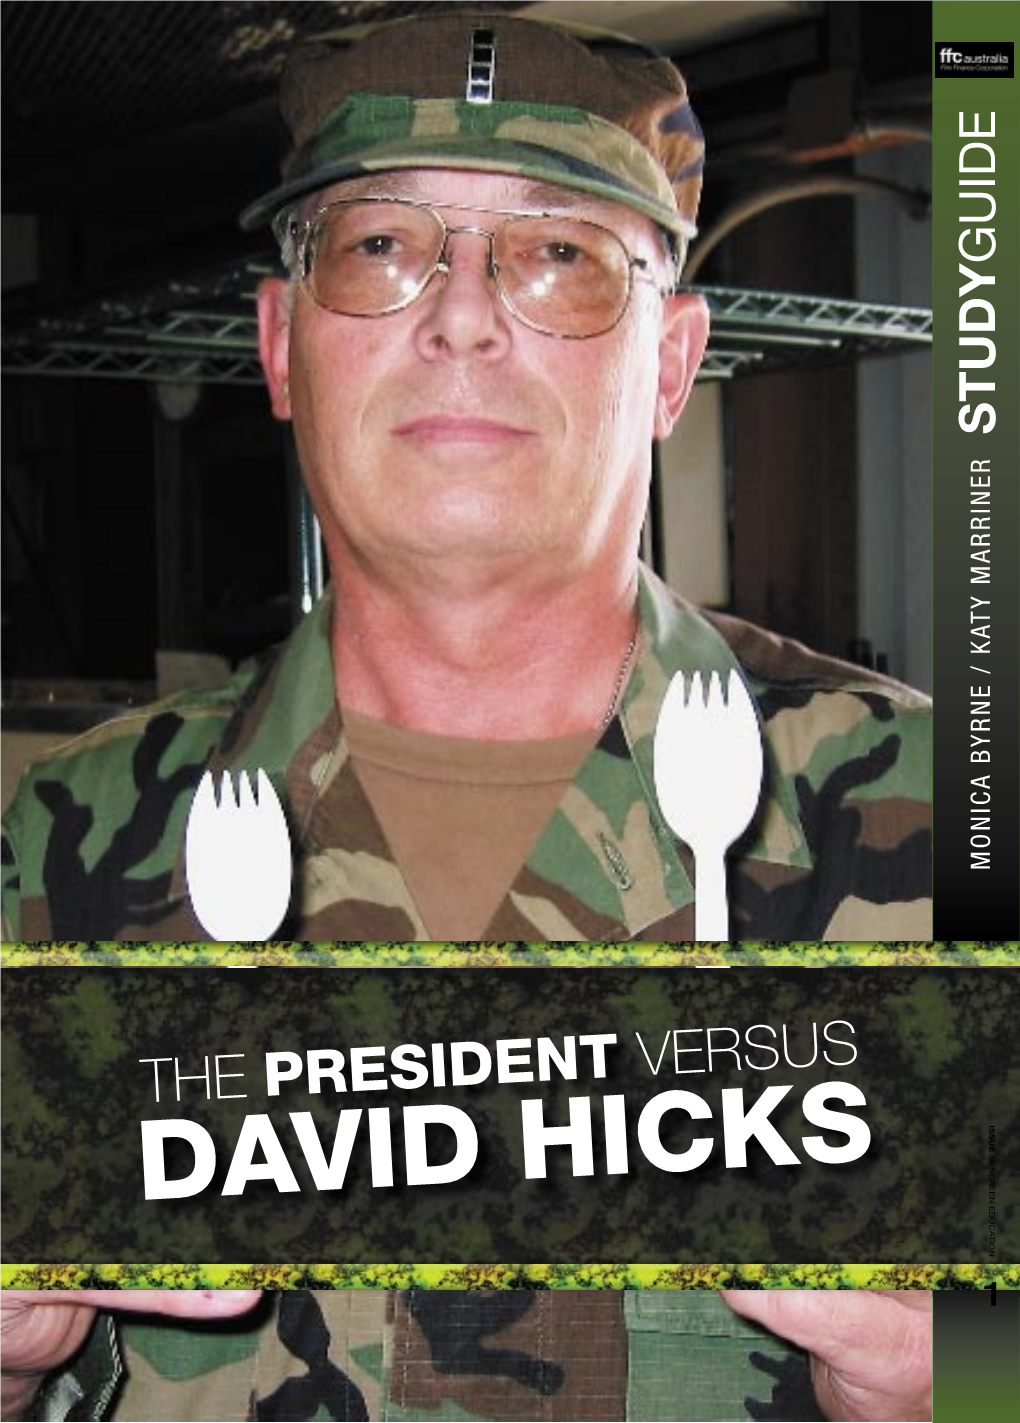 To Download the PRESIDENT VERSUS DAVID HICKS Study Guide